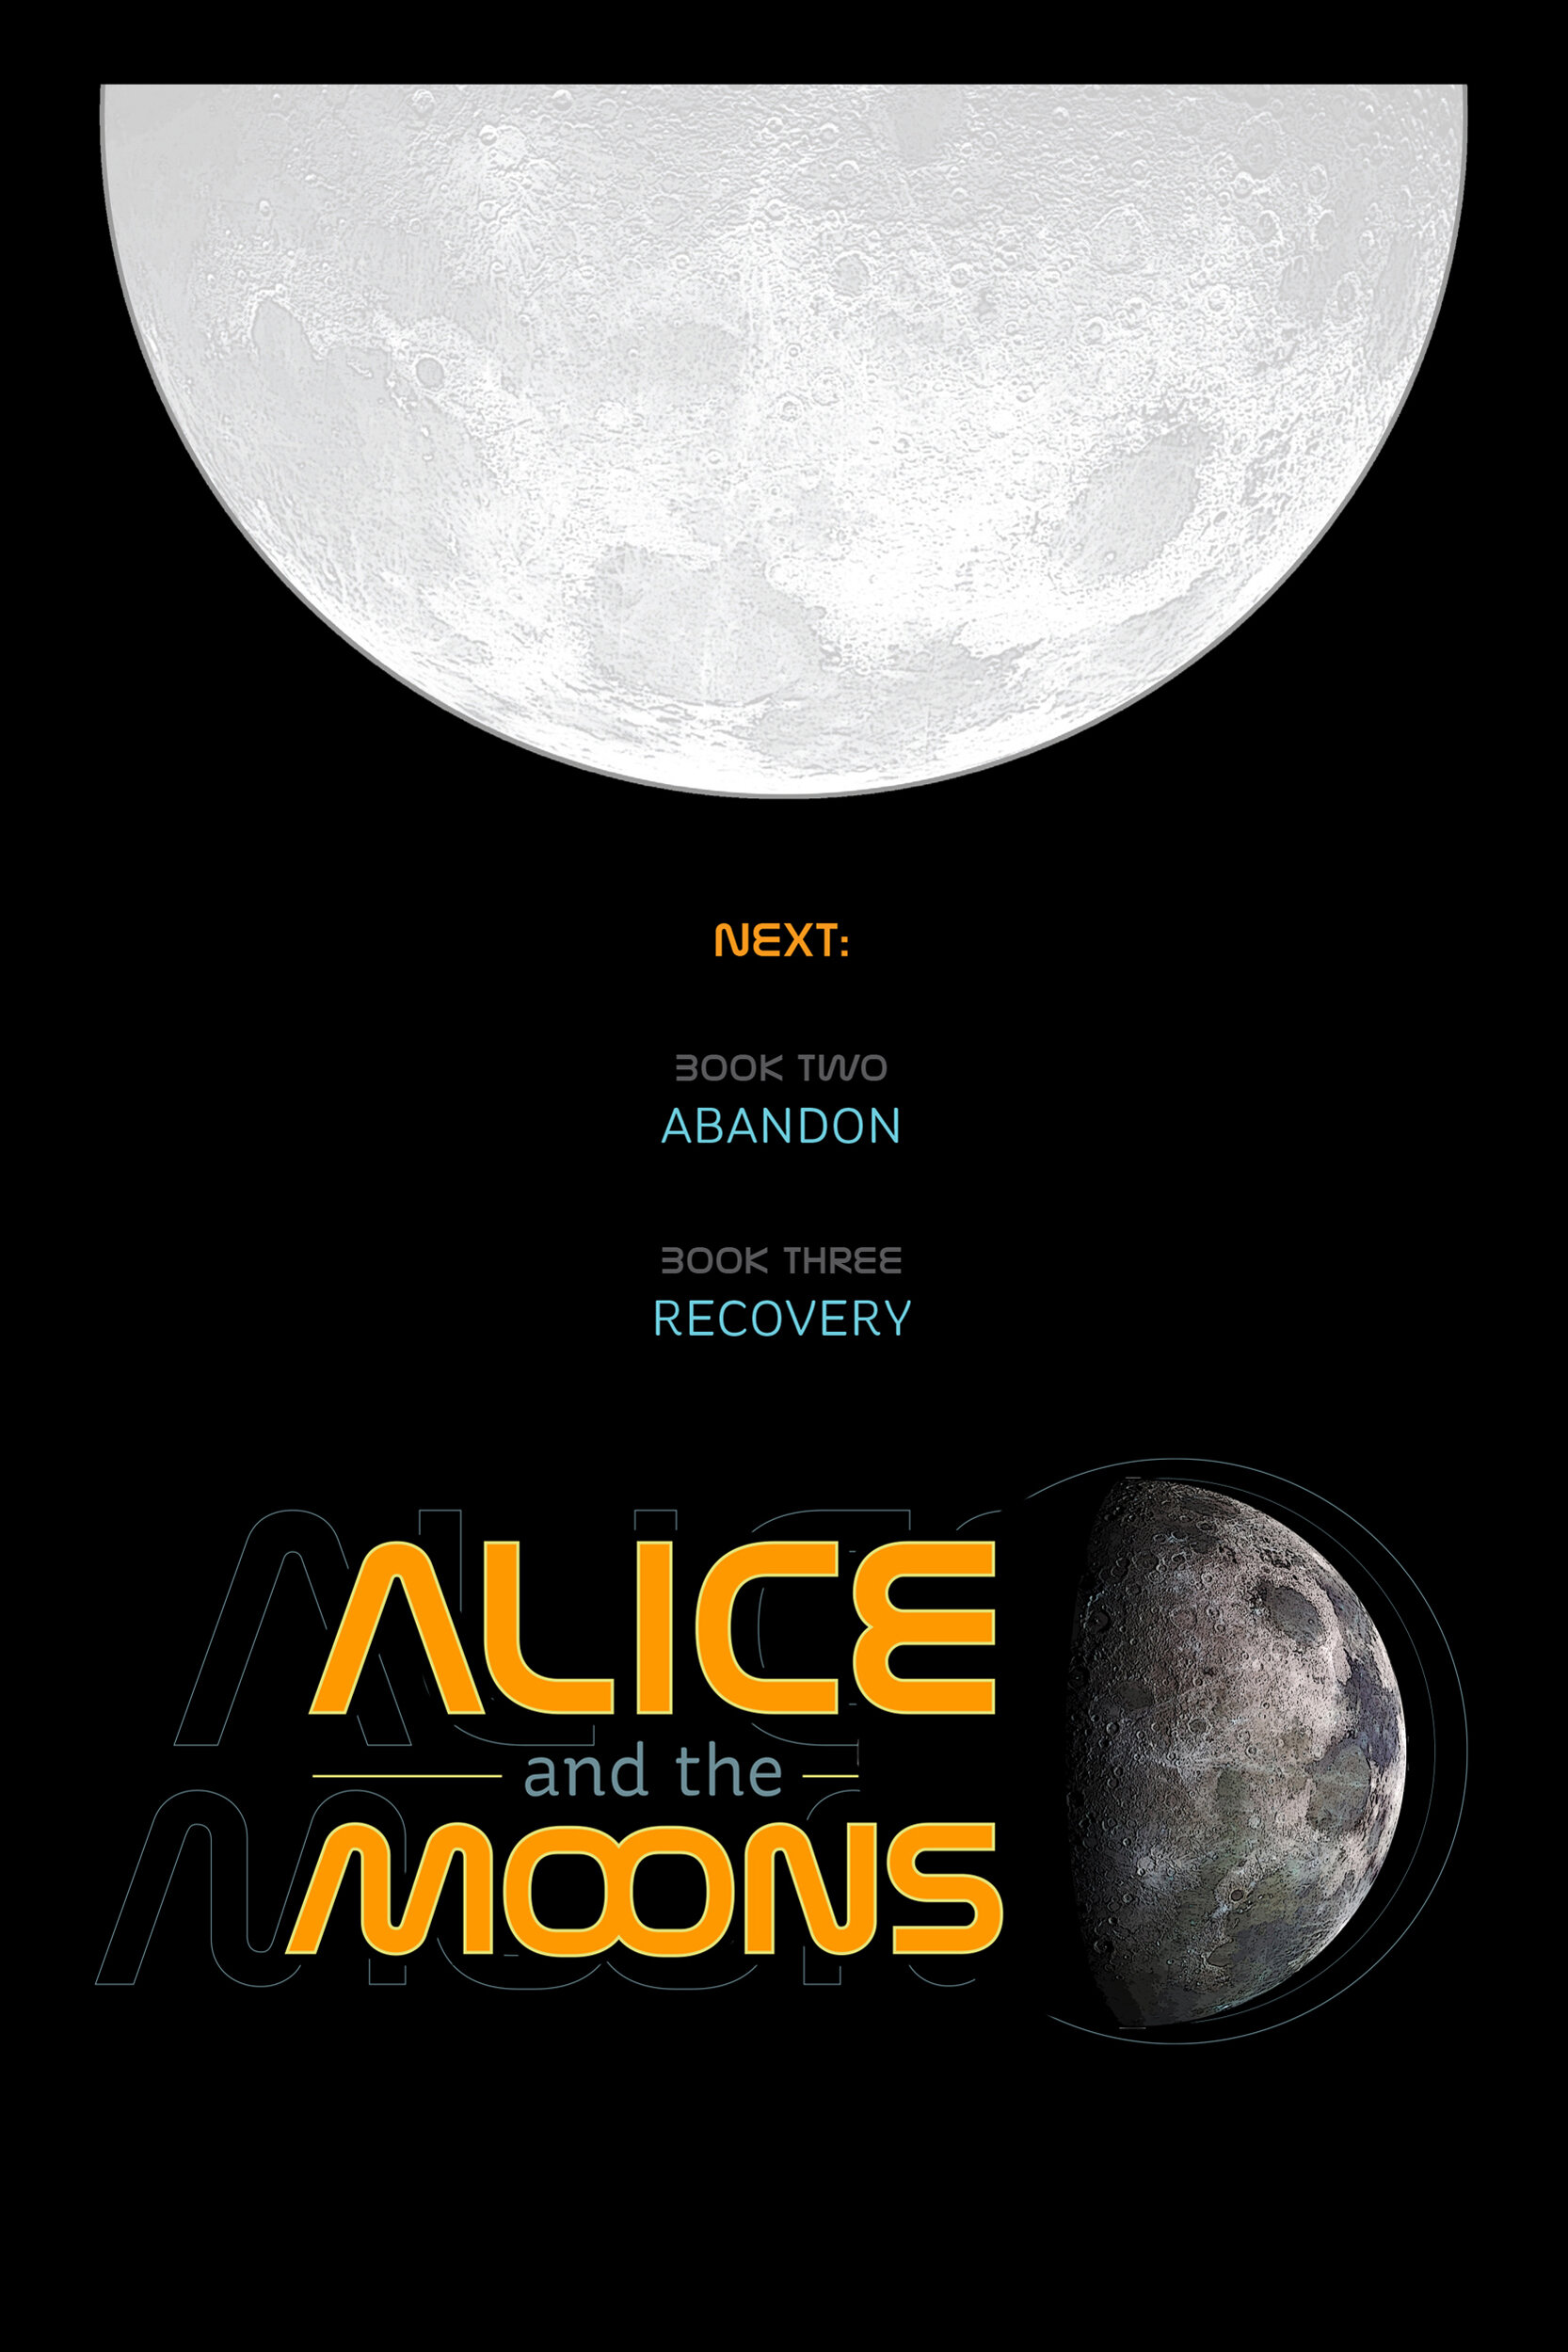 Alice-and-the-Moons_1_28.jpg